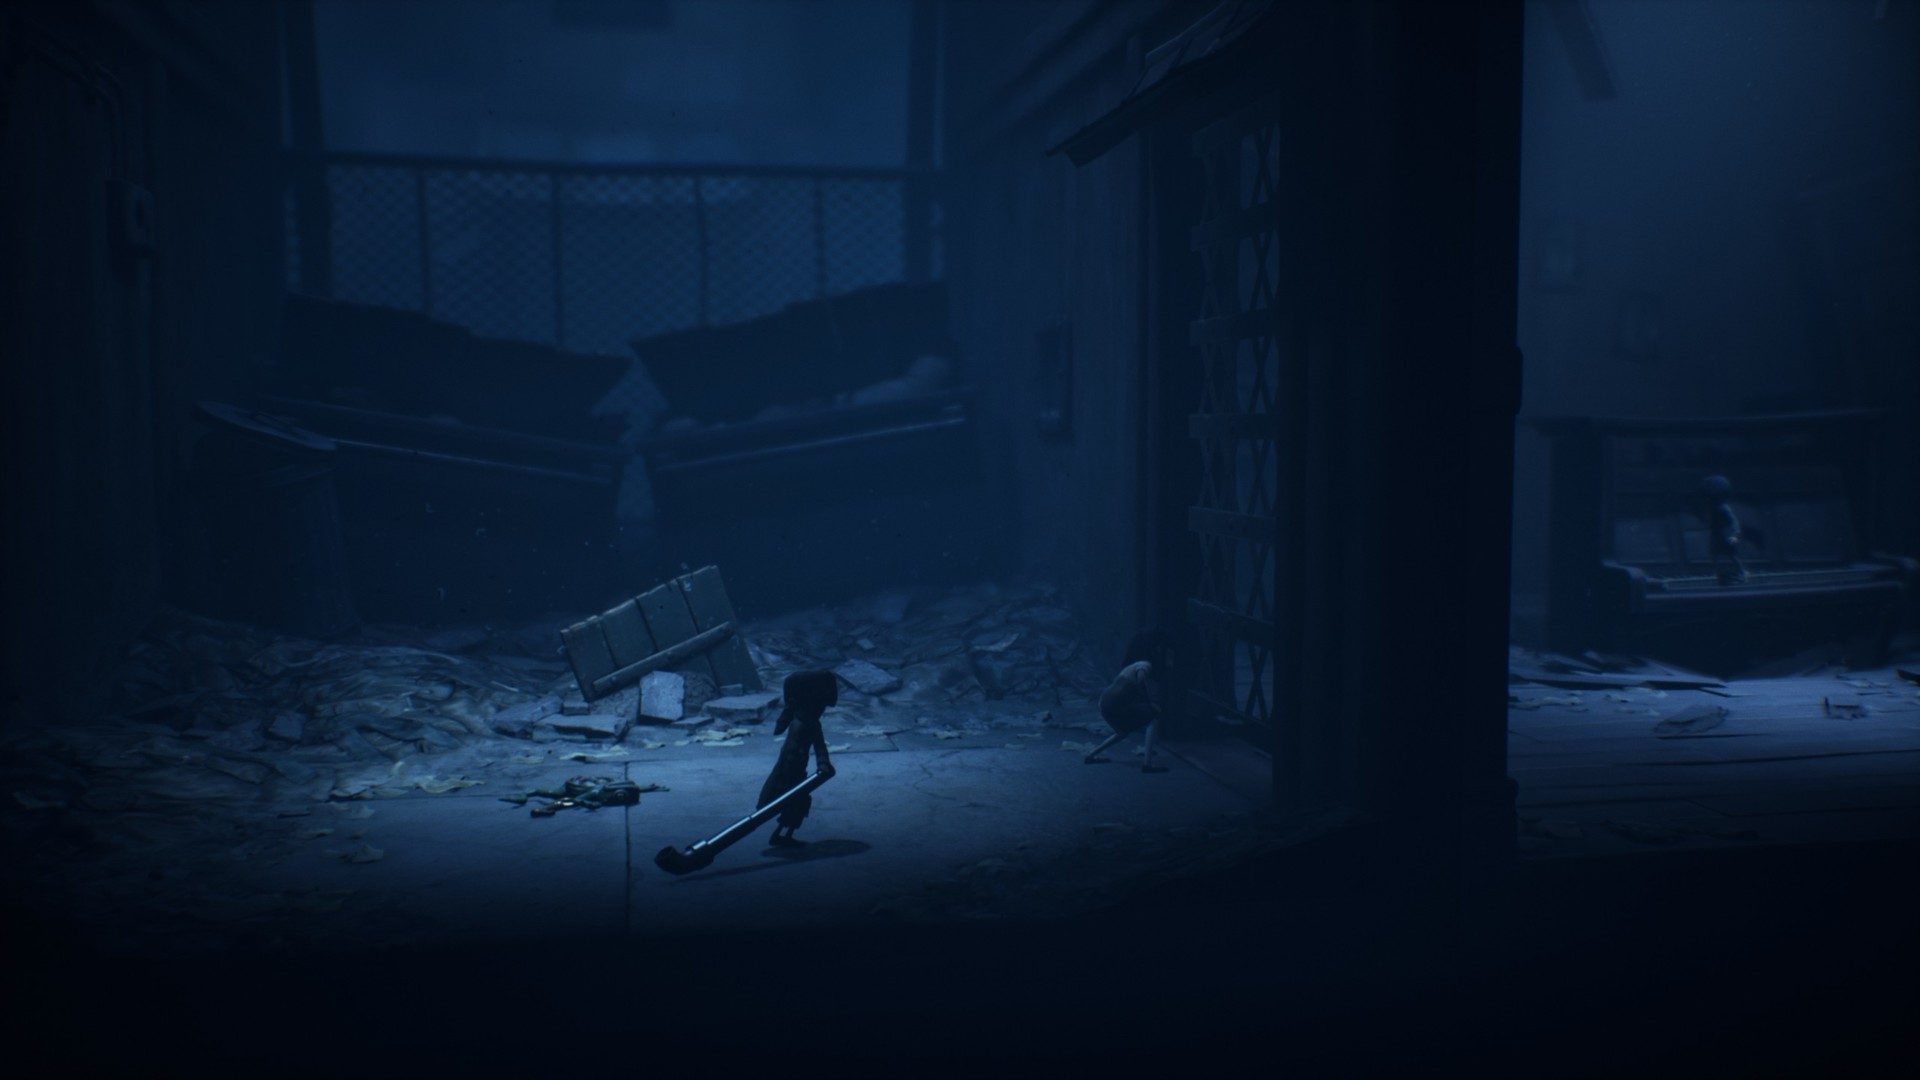 Little Nightmares 2 PC review